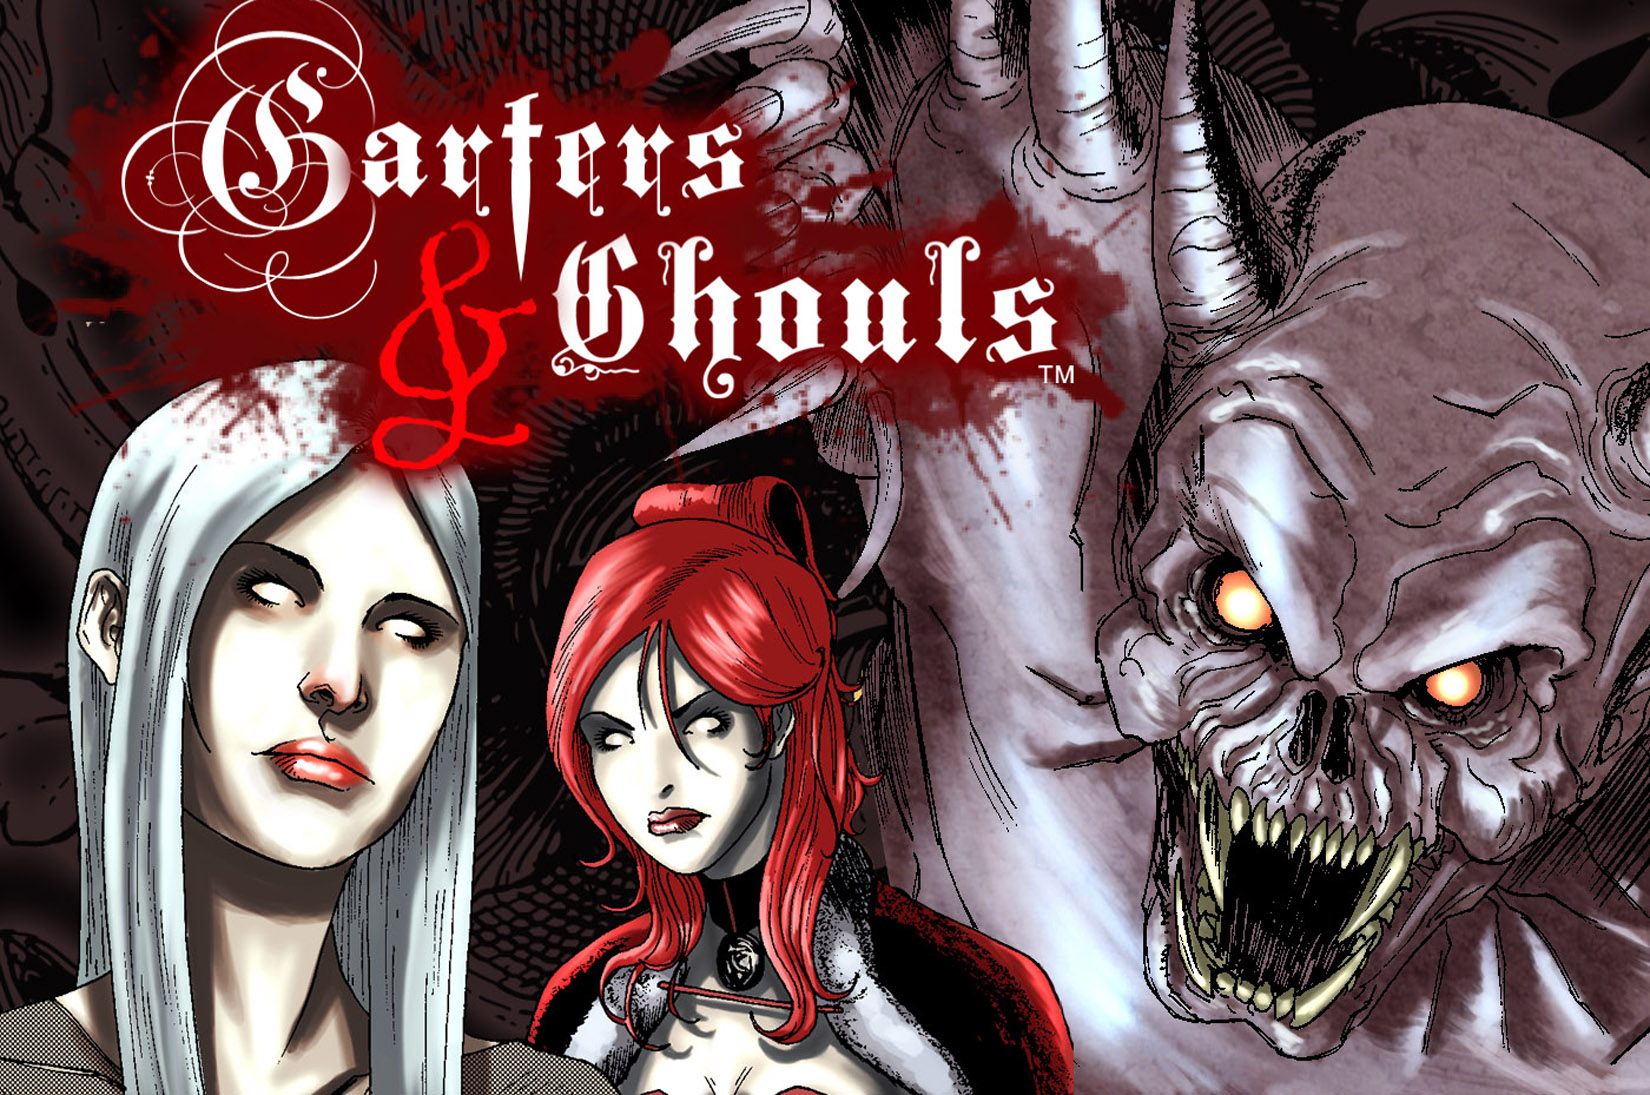 Read online Garters & Ghouls comic -  Issue # Full - 1